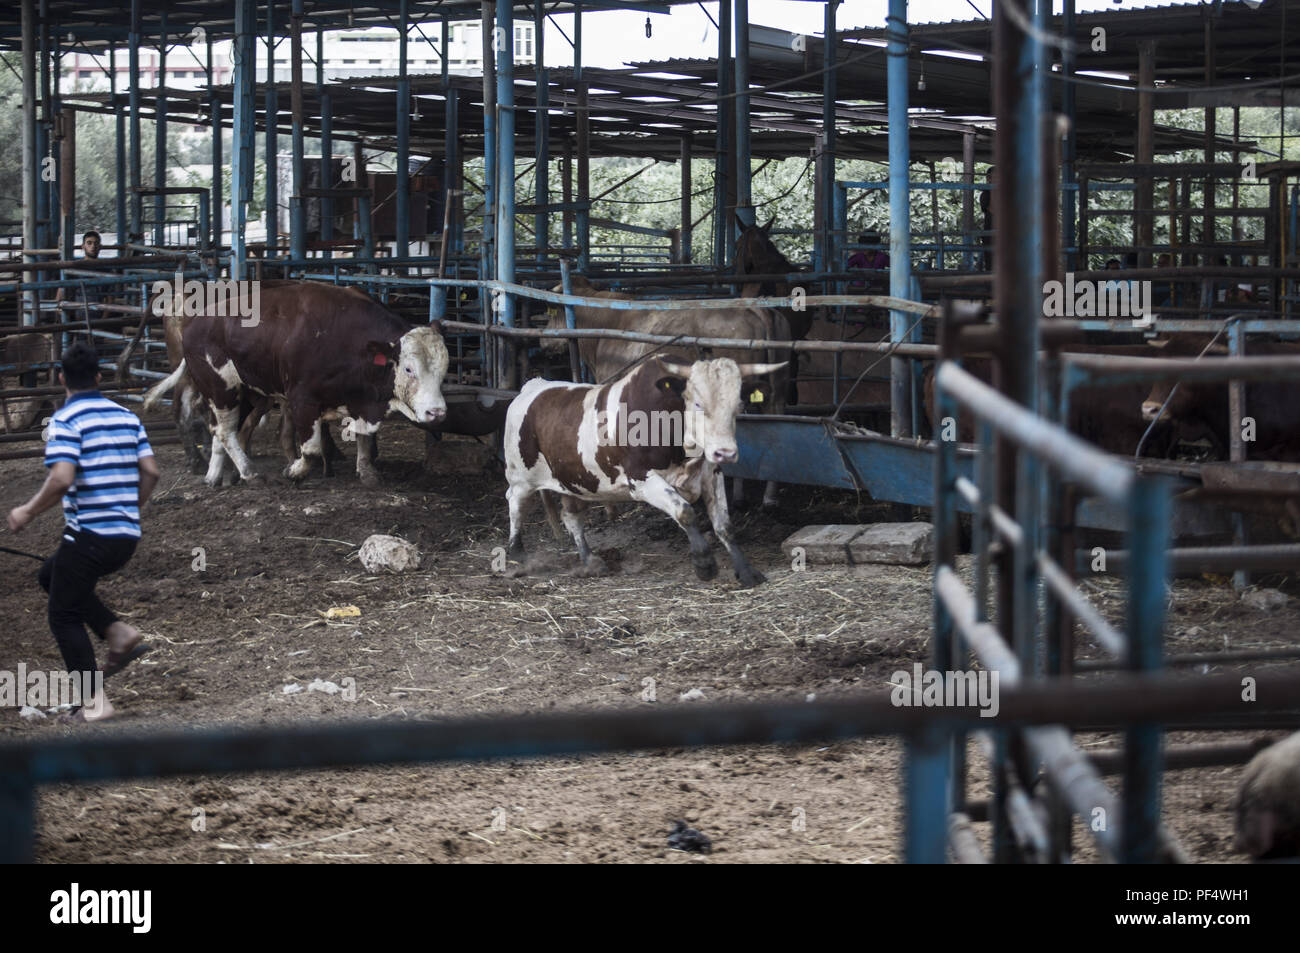 Gaza City, The Gaza Strip, Gaza. 18th Aug, 2018. Bulls seen running at the cattle shop.Palestinians gather in a cattle shop to purchase cattles to be sacrificed. before Eid al-Adha in the east of Jabalya refugee camp. Eid al-Adha (Festival of Sacrifice) is celebrated throughout the Islamic world as the commemoration of Abraham's will to sacrifice his son for God, cows, camels, goats and sheep are traditionally slaughtered on the Holy Day. Credit: Mahmoud Issa/SOPA Images/ZUMA Wire/Alamy Live News Stock Photo